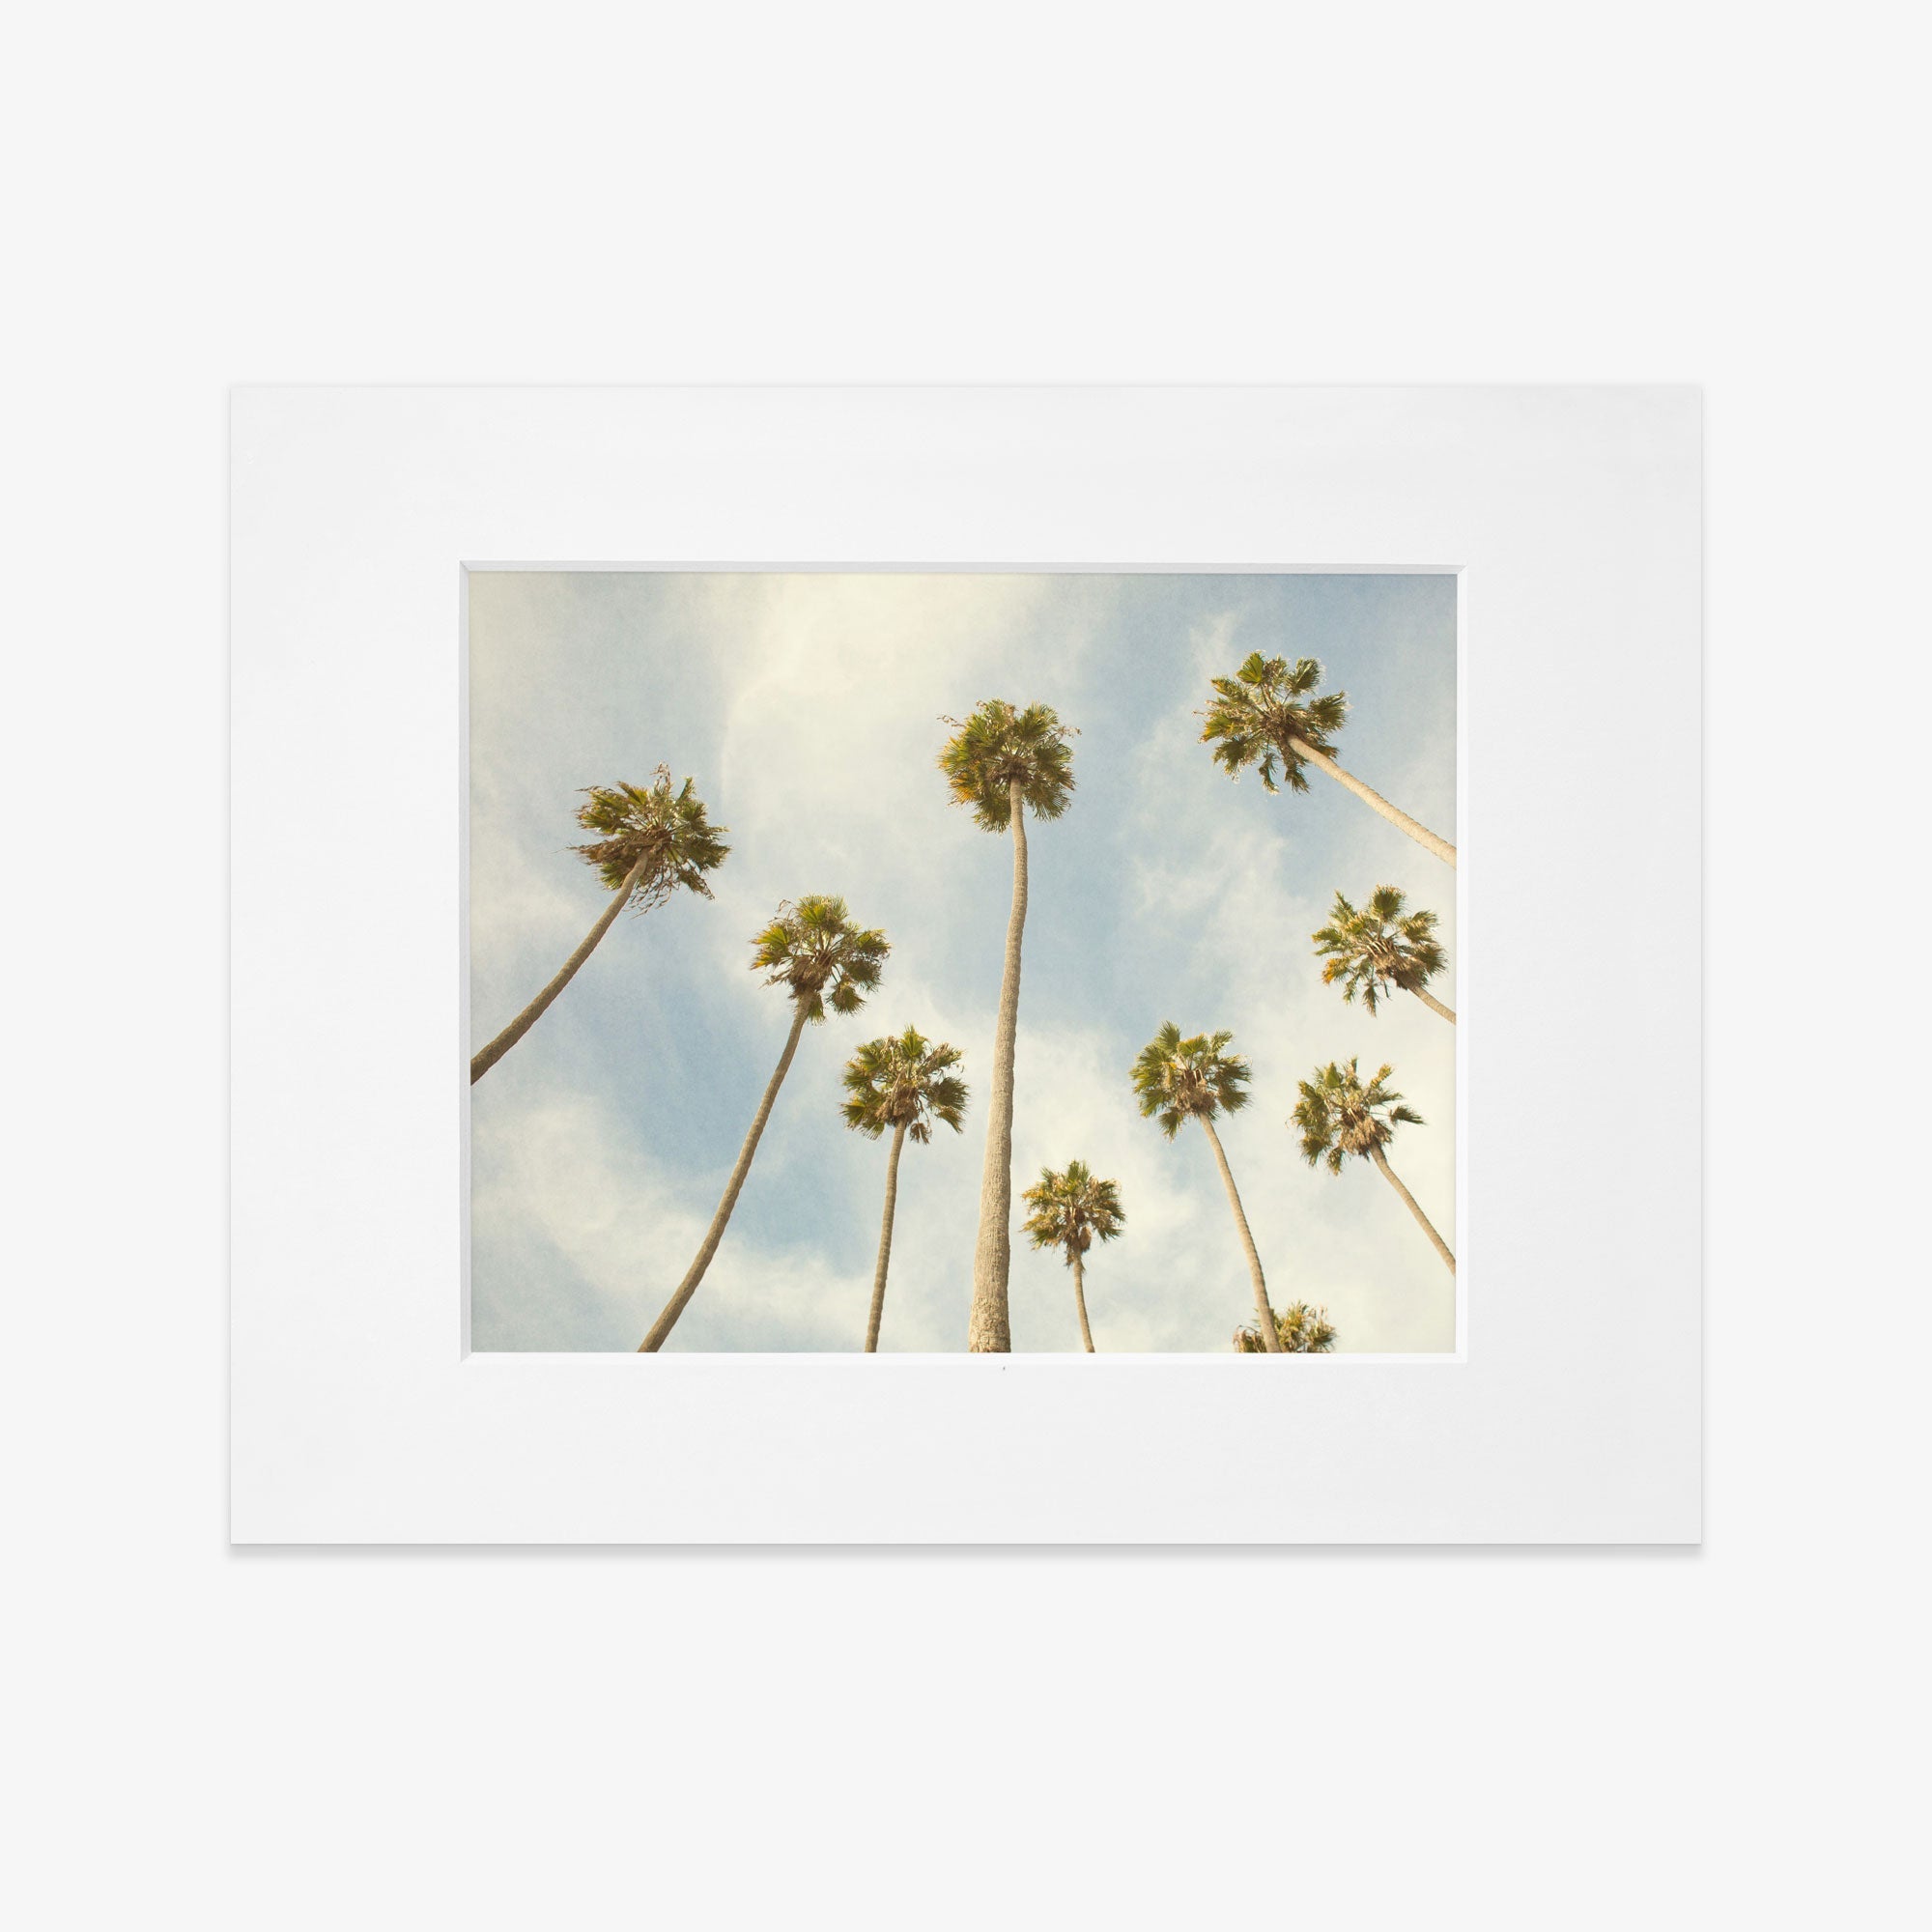 A framed photograph on archival photographic paper showing a group of tall California palm trees extending towards a clear blue sky with light clouds, viewed from a low angle. The Offley Green Palm Tree Print, California Beach Scene &#39;Reach for the Palms&#39;.